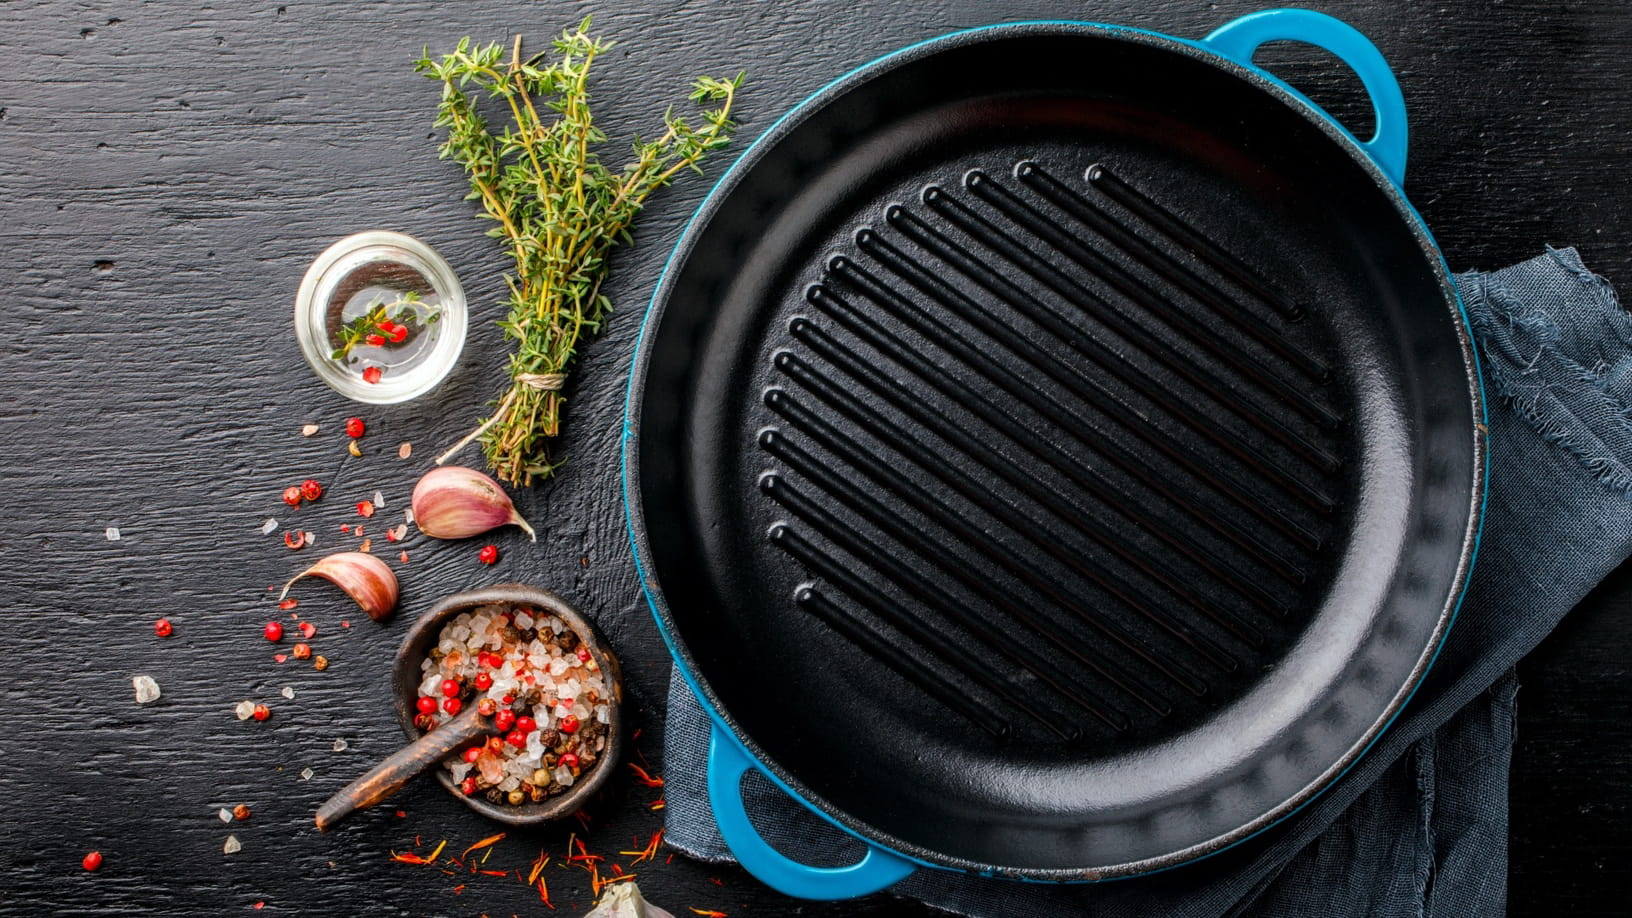 SENSARTE Nonstick Grill Pan for Stove Tops, Versatile Griddle with Pour  Spouts, Square Big Cooking Surface, Durable Skillet Indoor & Outdoor  Grilling.